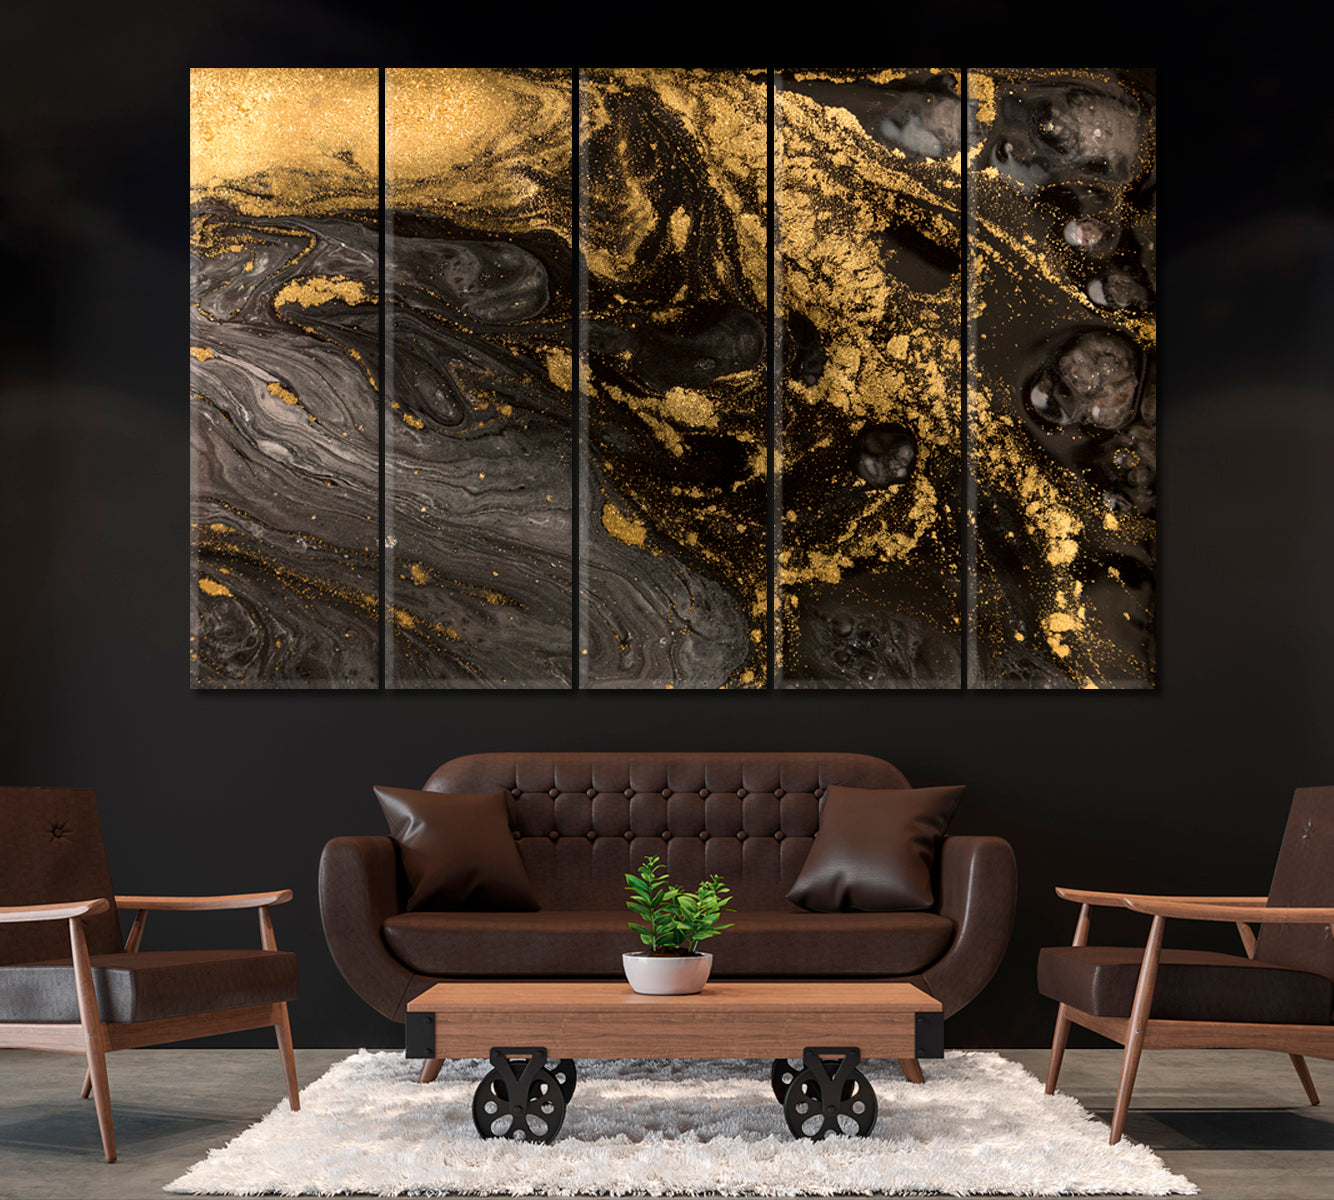 Gray and Gold Liquid Marble Pattern Canvas Print ArtLexy 5 Panels 36"x24" inches 